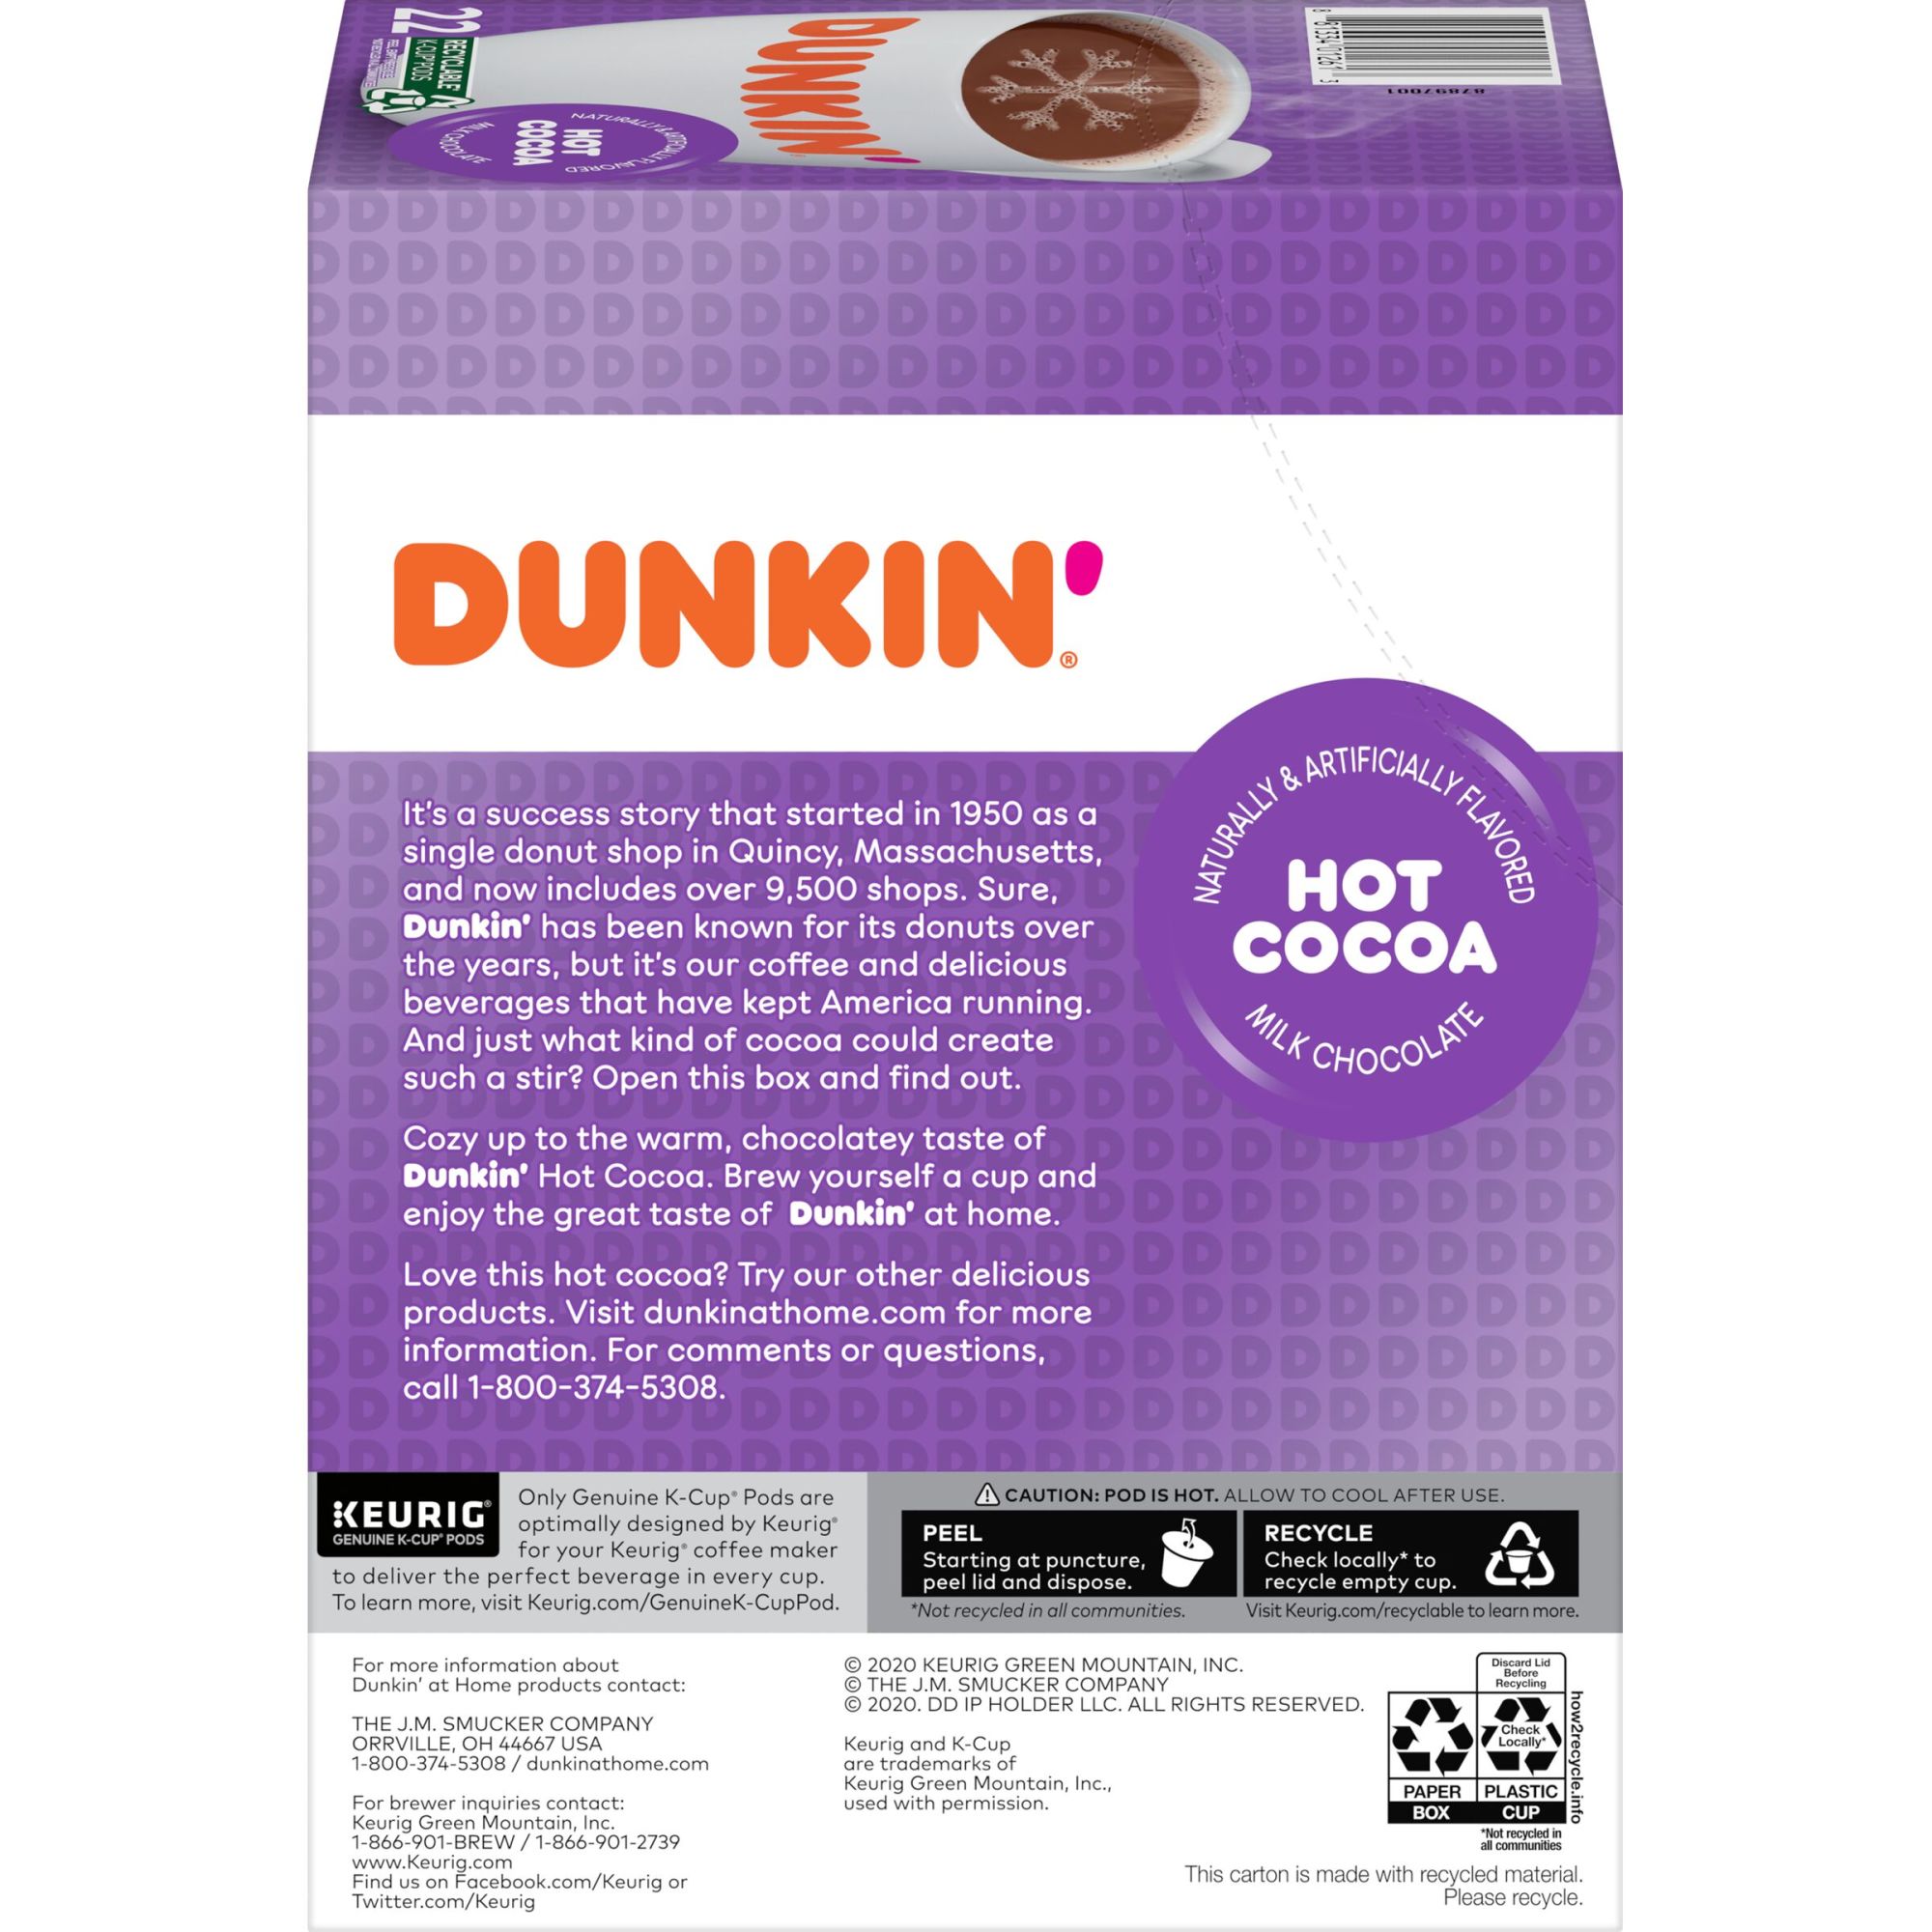 Dunkin' Hot Cocoa, Keurig K-Cup Pods, 22 Count Box - image 5 of 6